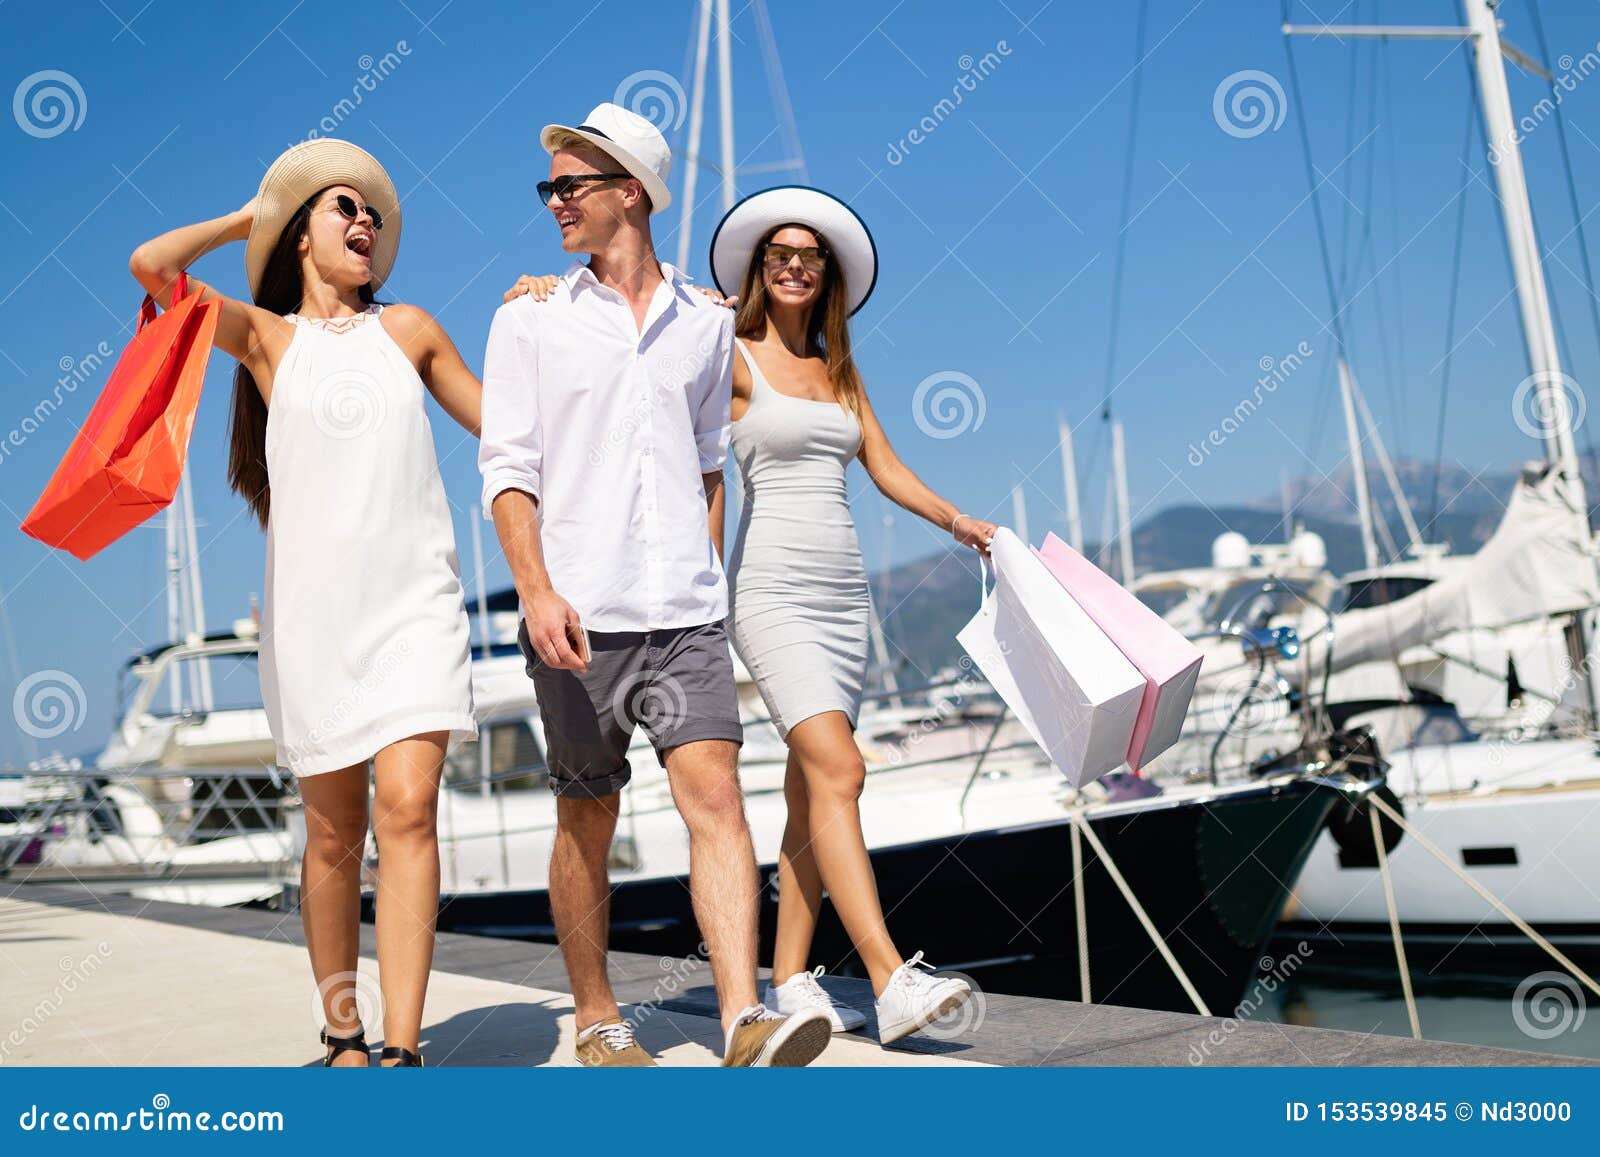 Happy People Enjoying and Having Fun on a Luxury Summer Vacation